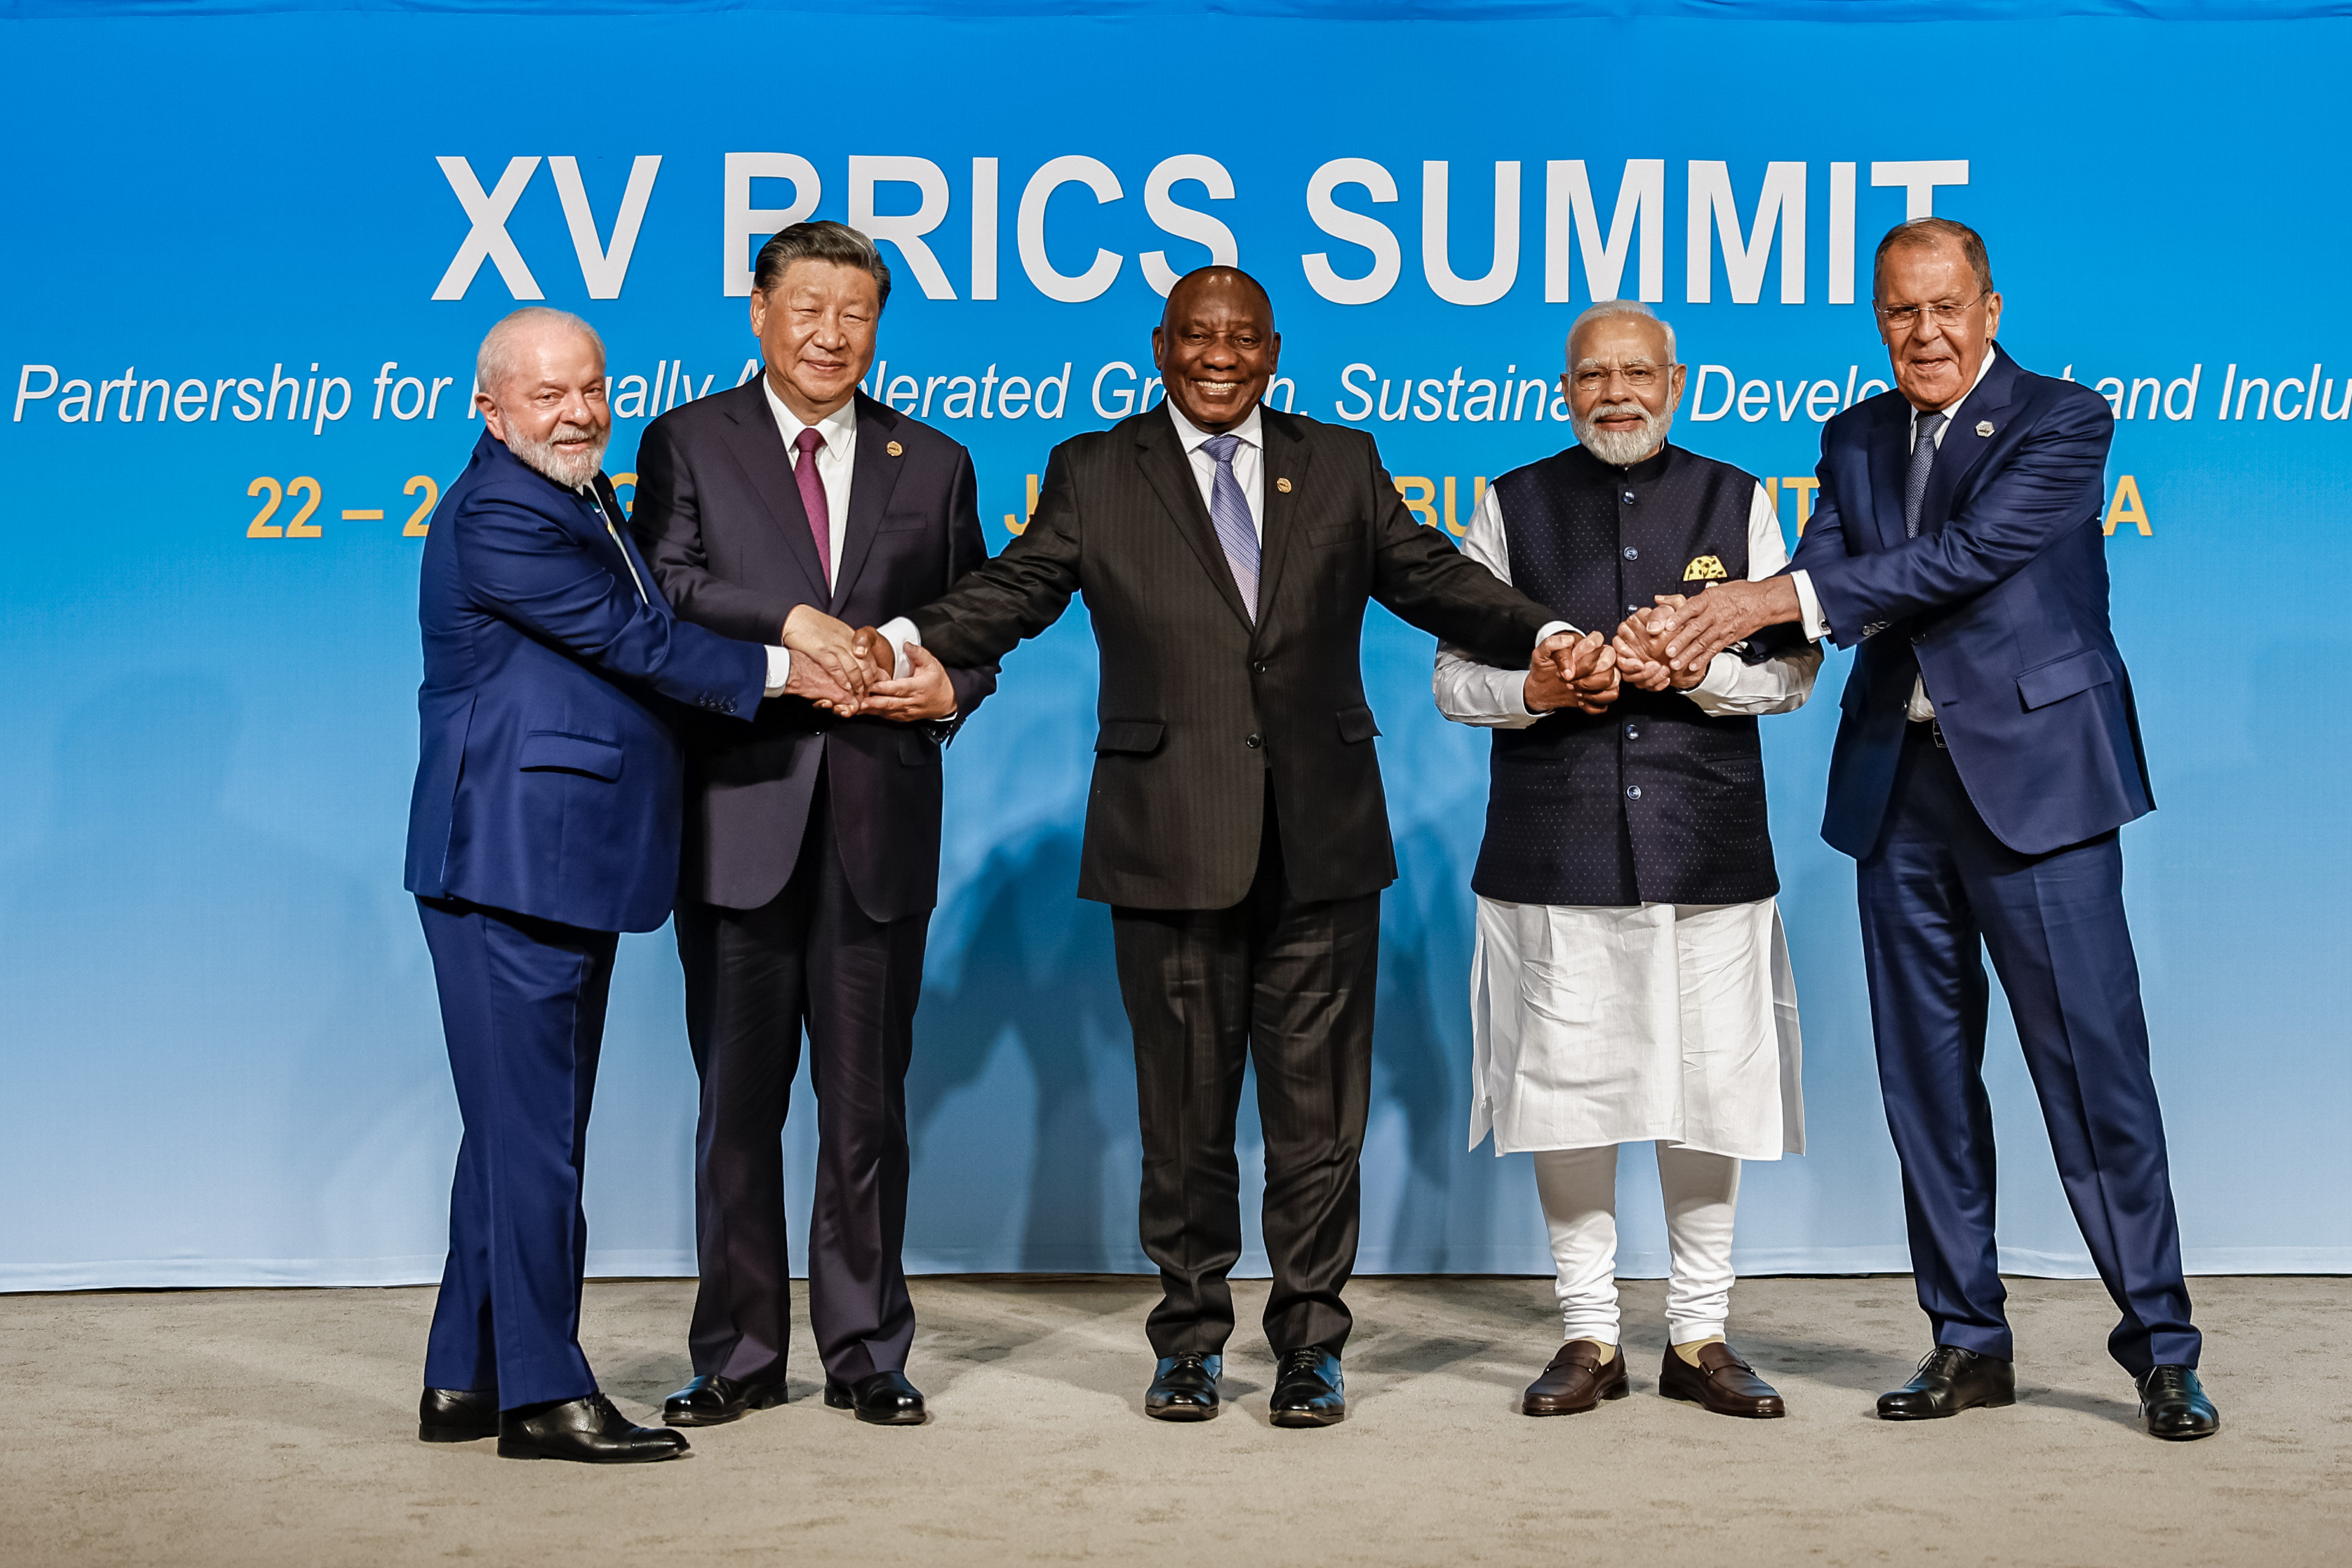 (From left) Brazil’s President Luiz Inacio Lula da Silva, China’s President Xi Jinping, South African President Cyril Ramaphosa, Indian Prime Minister Narendra Modi and Russia’s Foreign Minister Sergei Lavrov at the BRICS Summit in Johannesburg on August 23. Photo: dpa